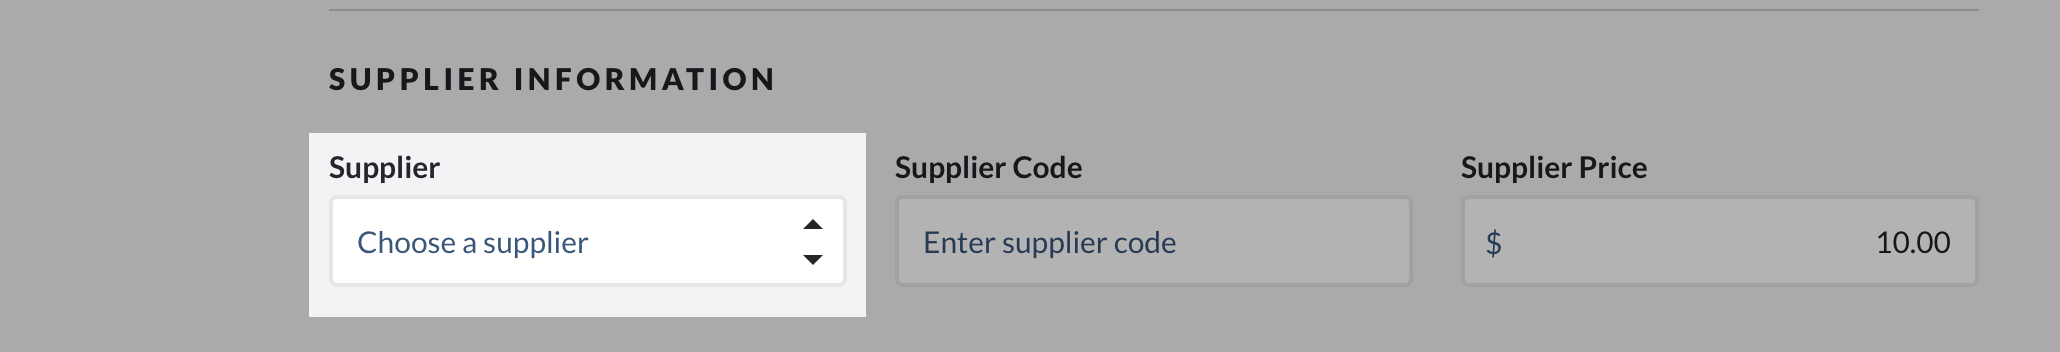 Supplier-name.png